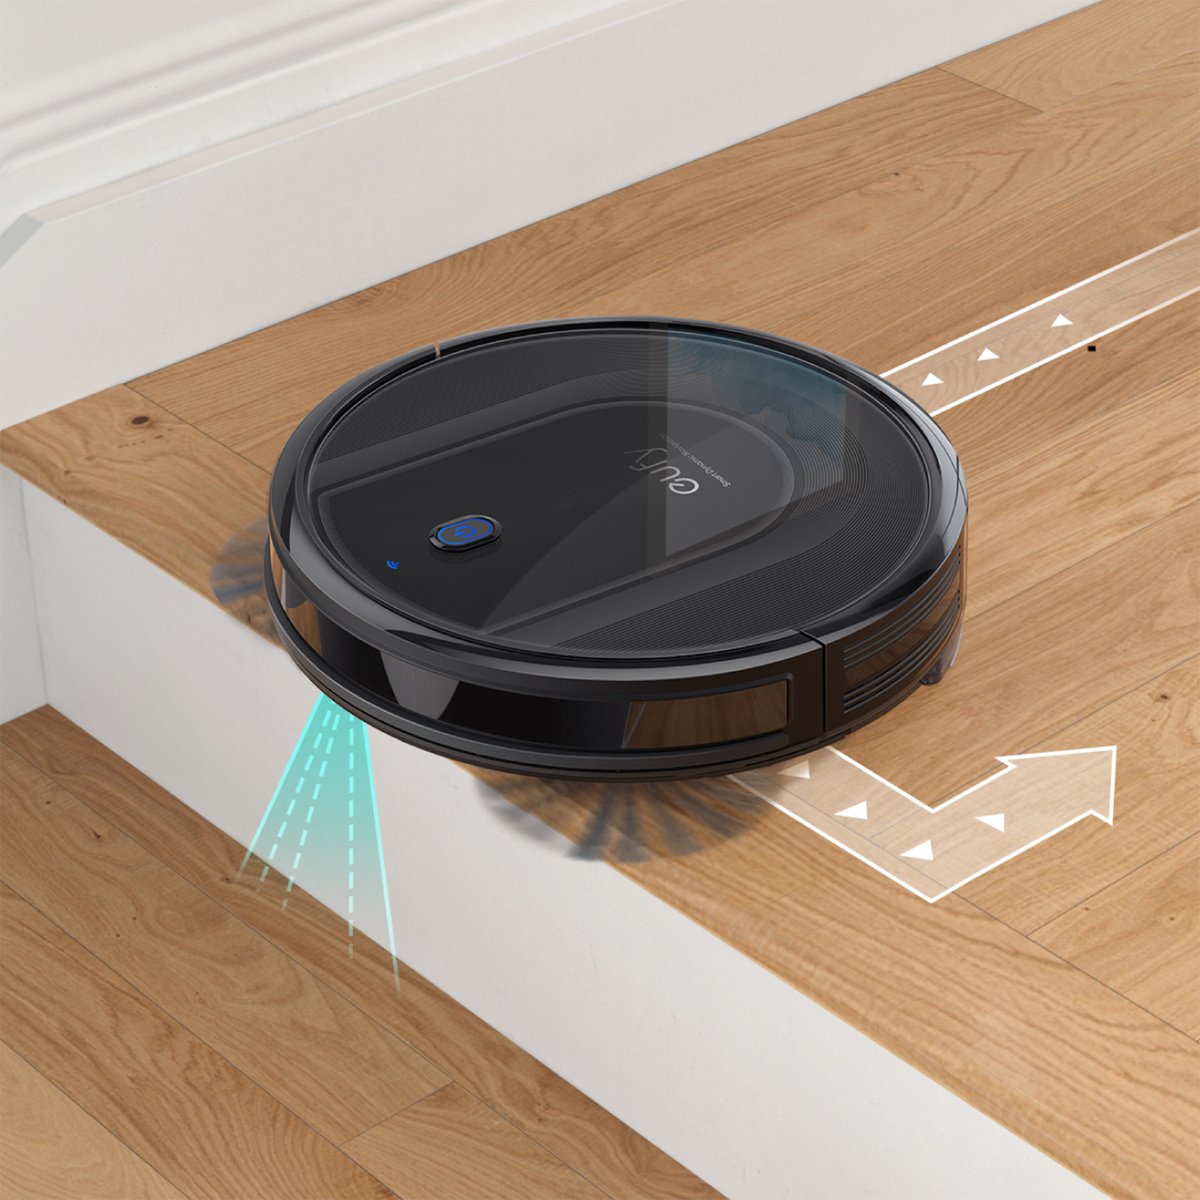 Eufy RoboVac G10 Hybrid Robotic Vacuum Cleaner T2150K11, Smart Dynamic Navigation, 2-in-1 Sweep and mop, Wi-Fi, Super-Slim, 2000Pa Strong Suction, Quiet, Self-Charging Robotic Vacuum, for Hard Floors Only